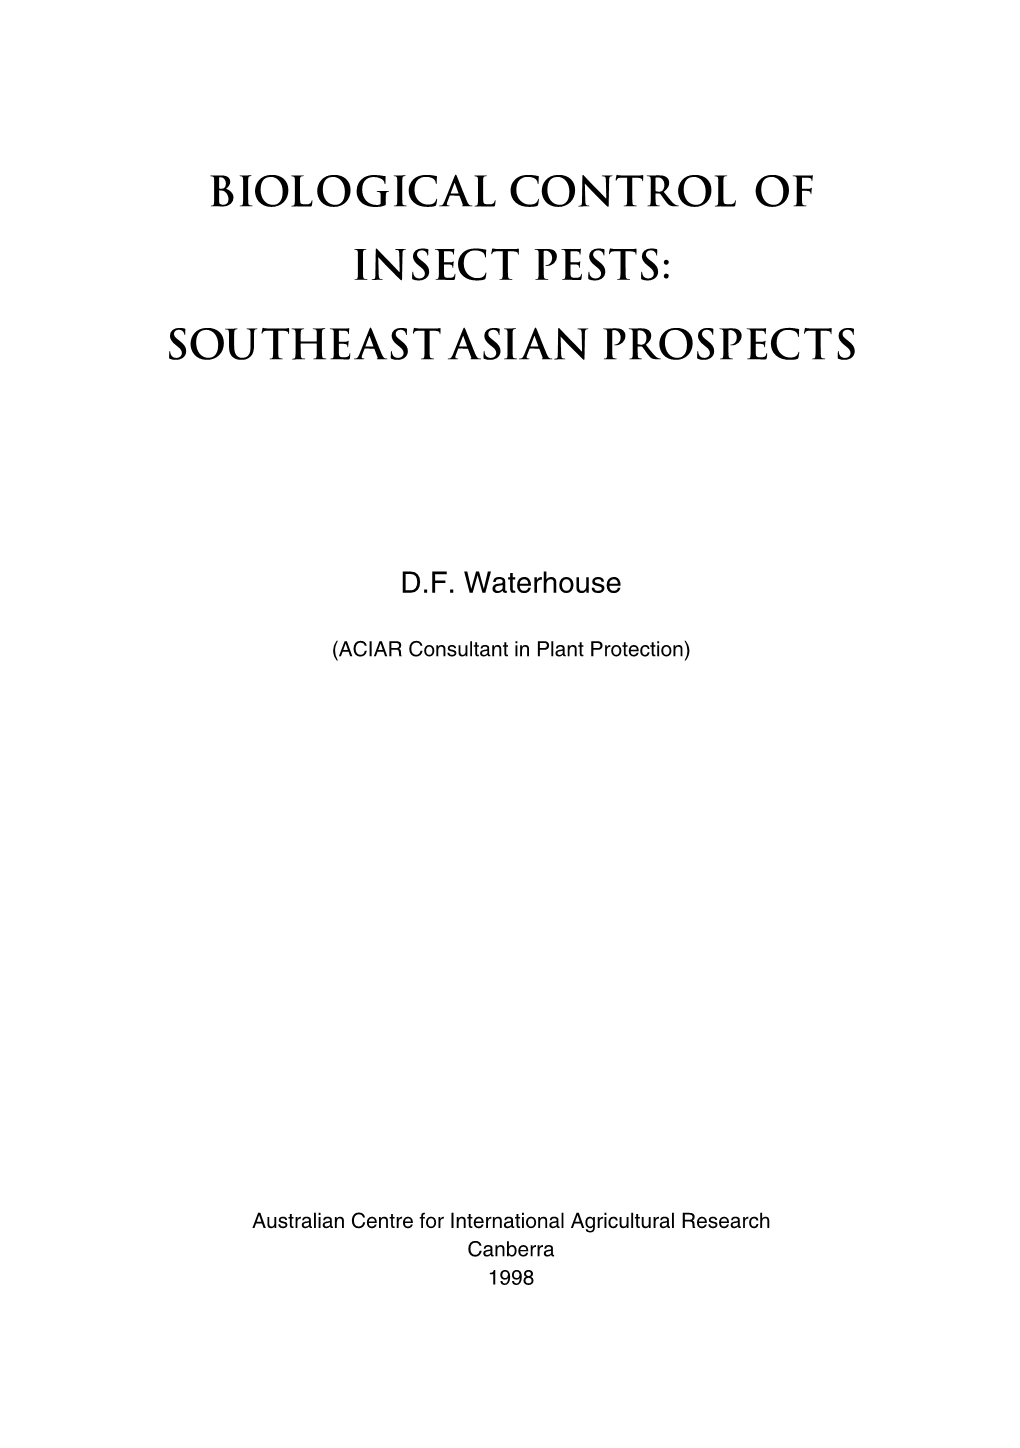 Biological Control of Insect Pests: Southeast Asian Prospects